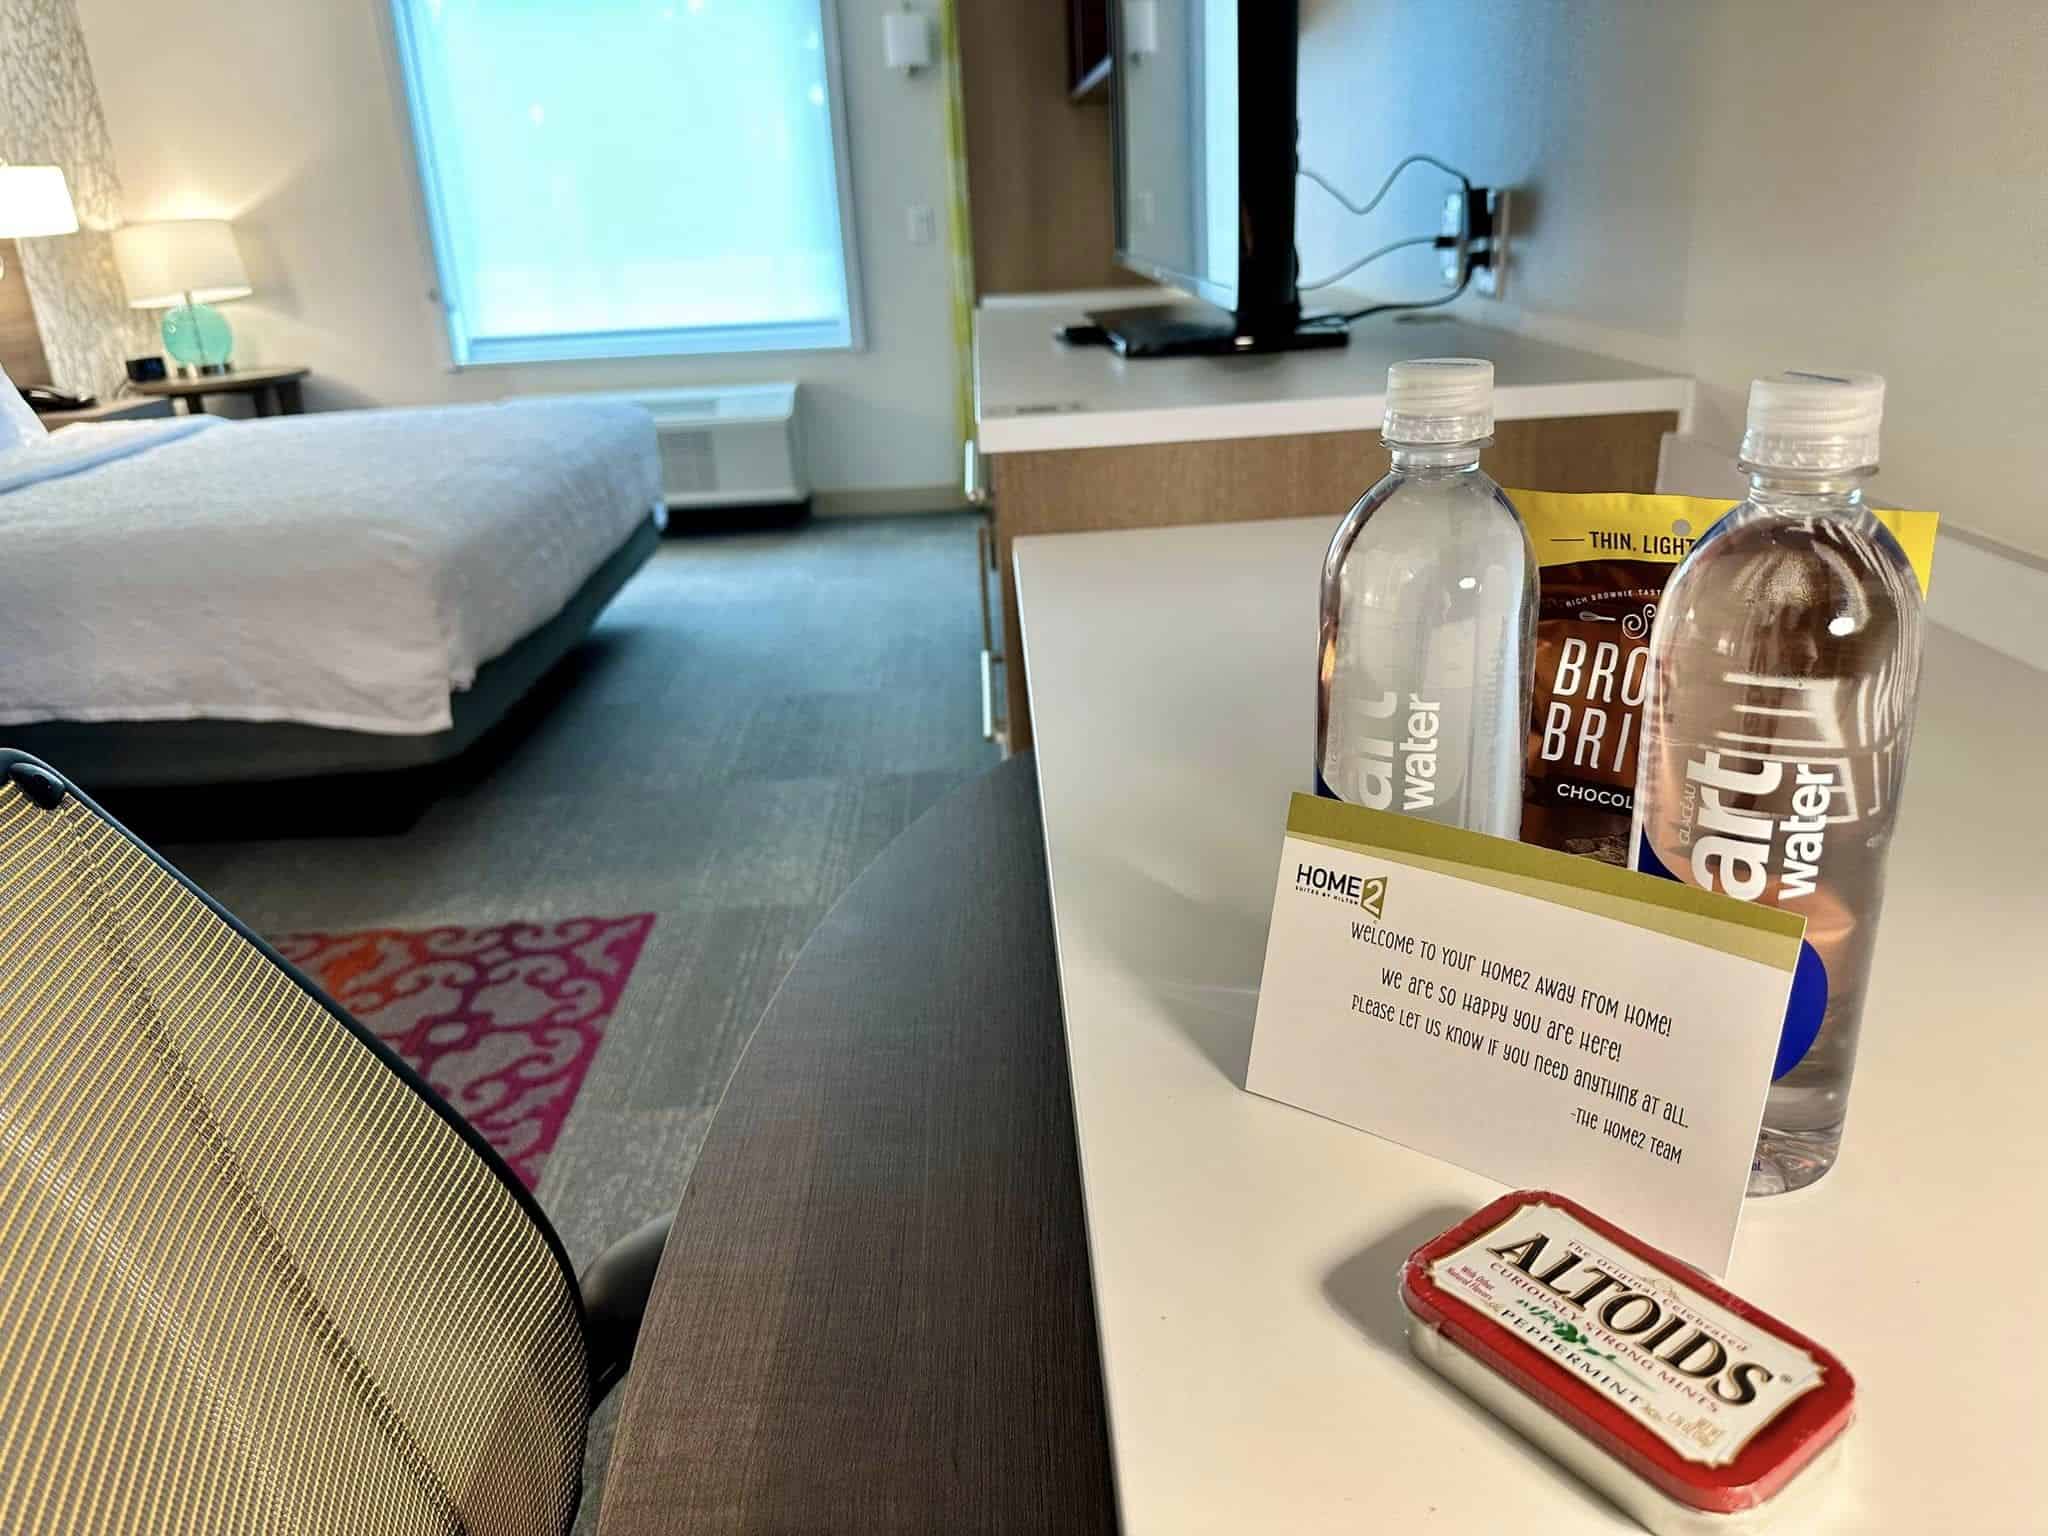 In-room gifts for the guests of Home2 Suites by Hilton Poughkeepsie, NY